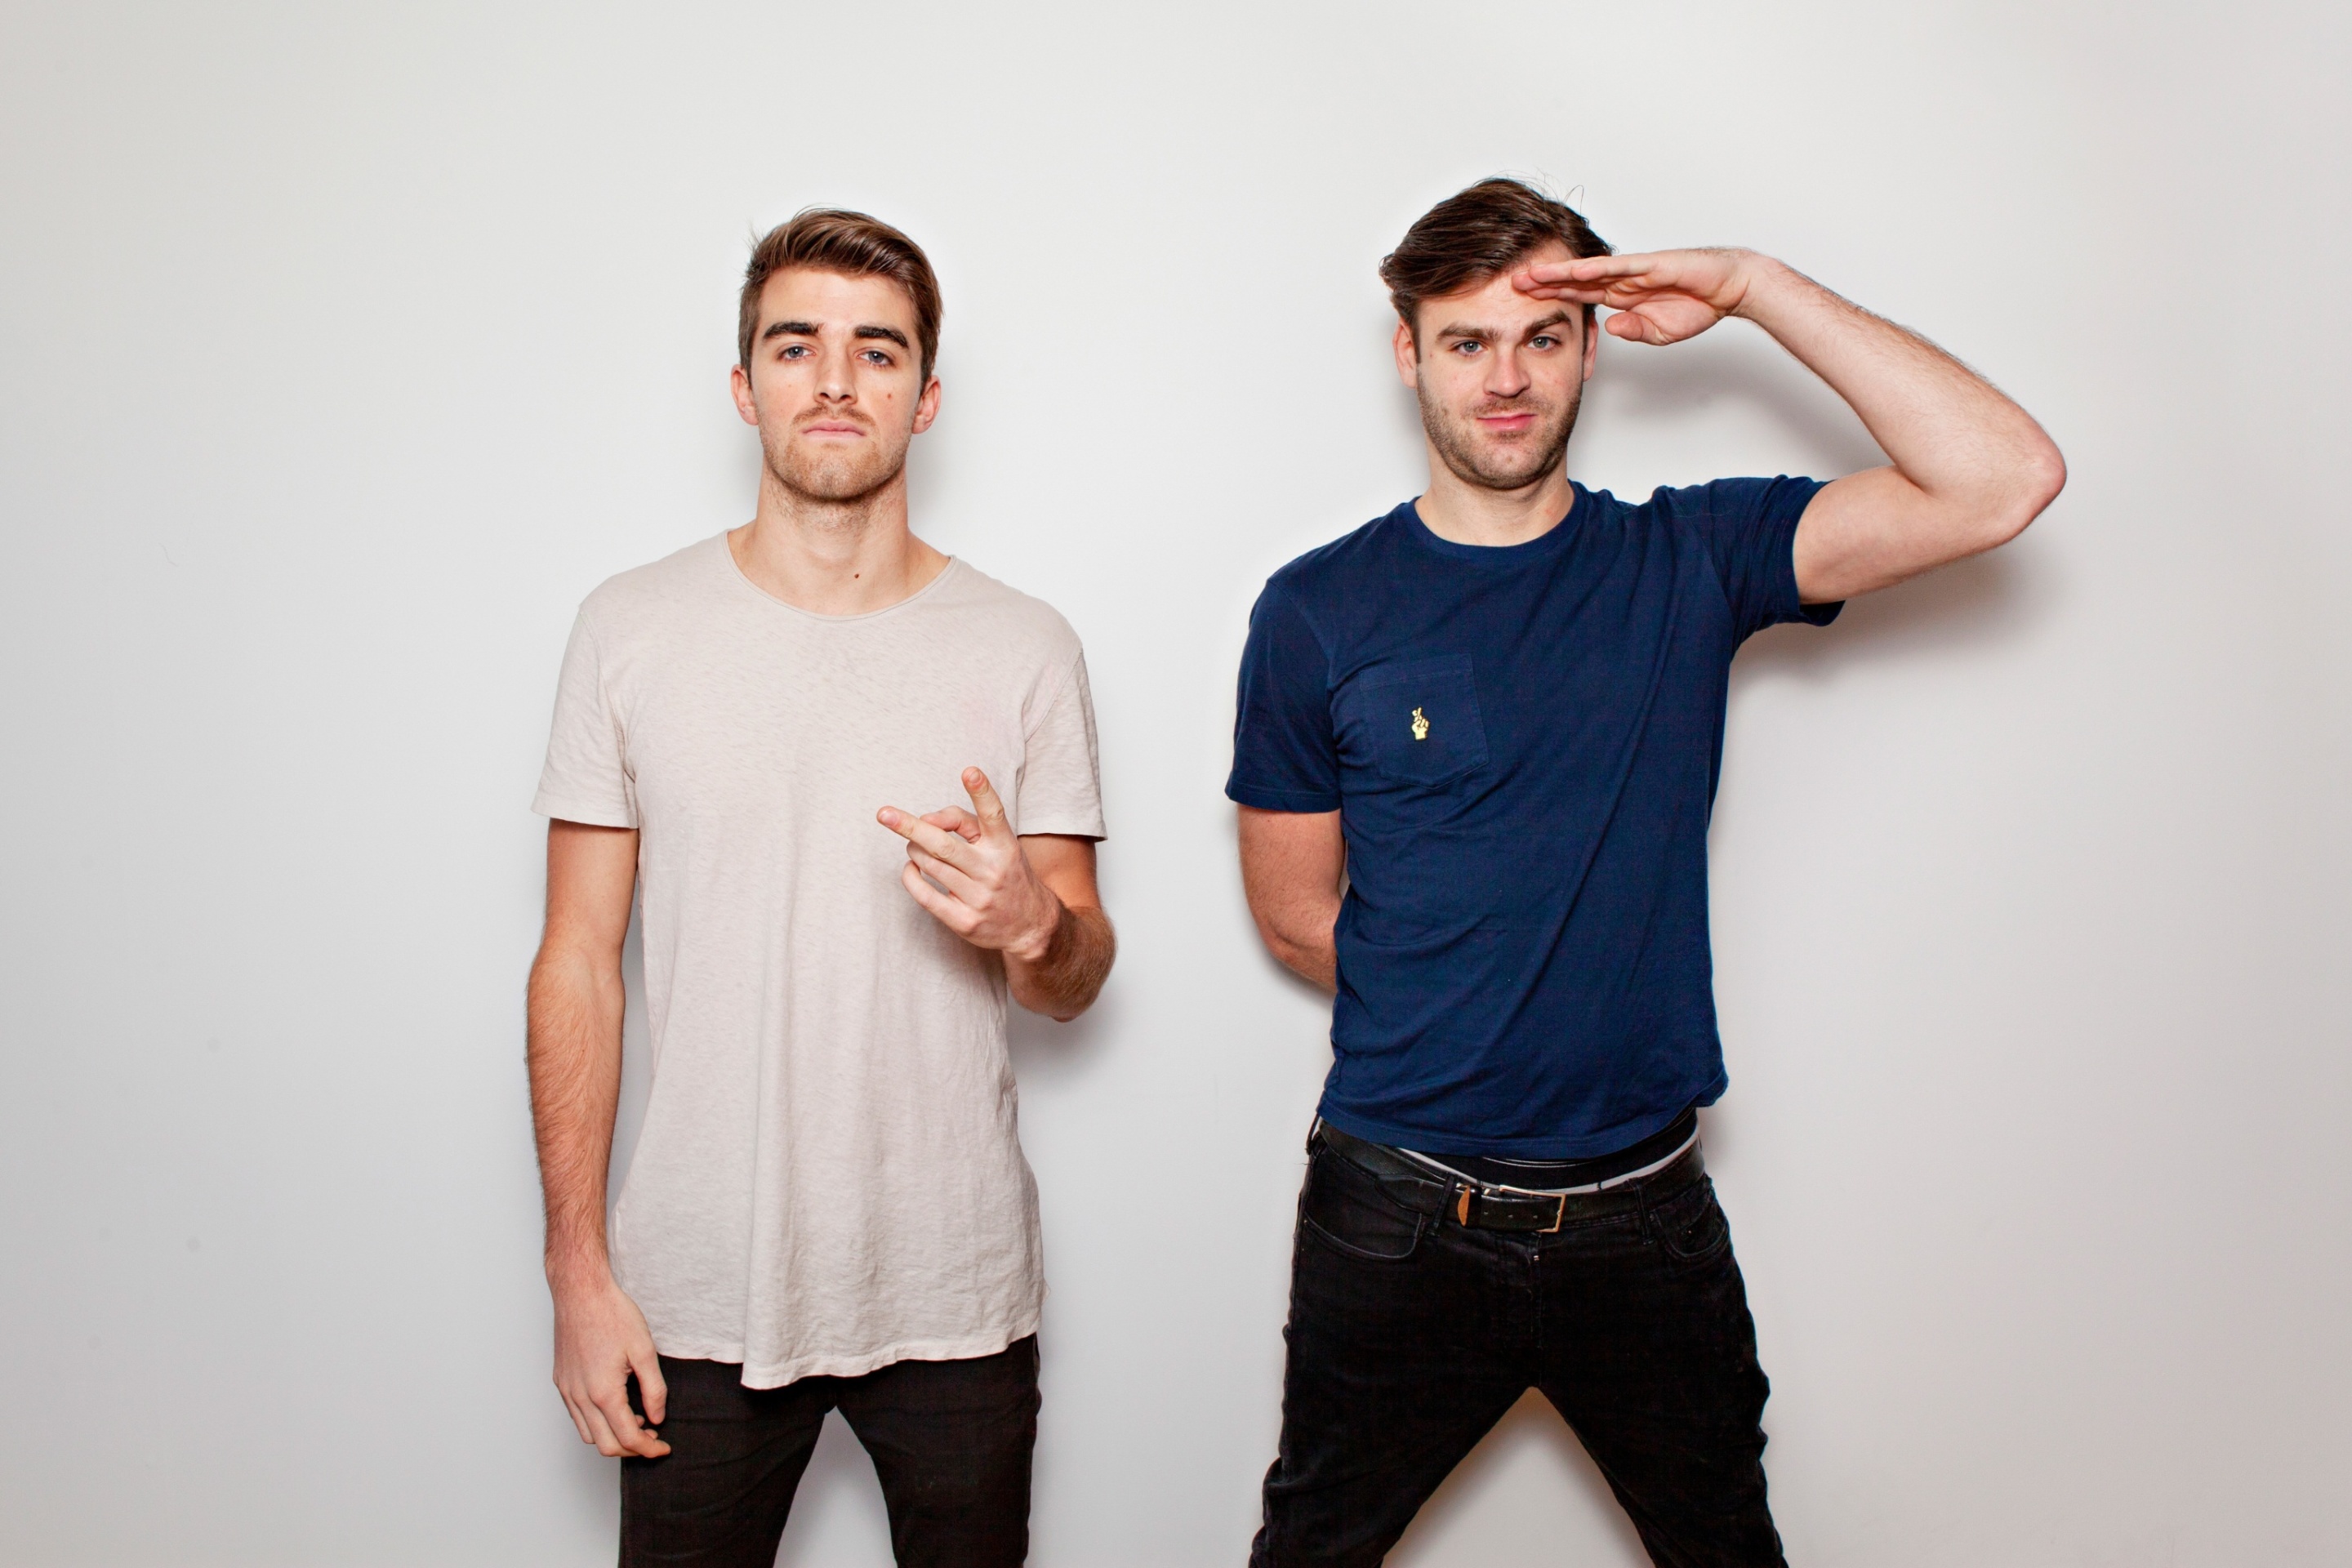 The Chainsmokers with Andrew Taggart and Alex Pall wallpaper 2880x1920